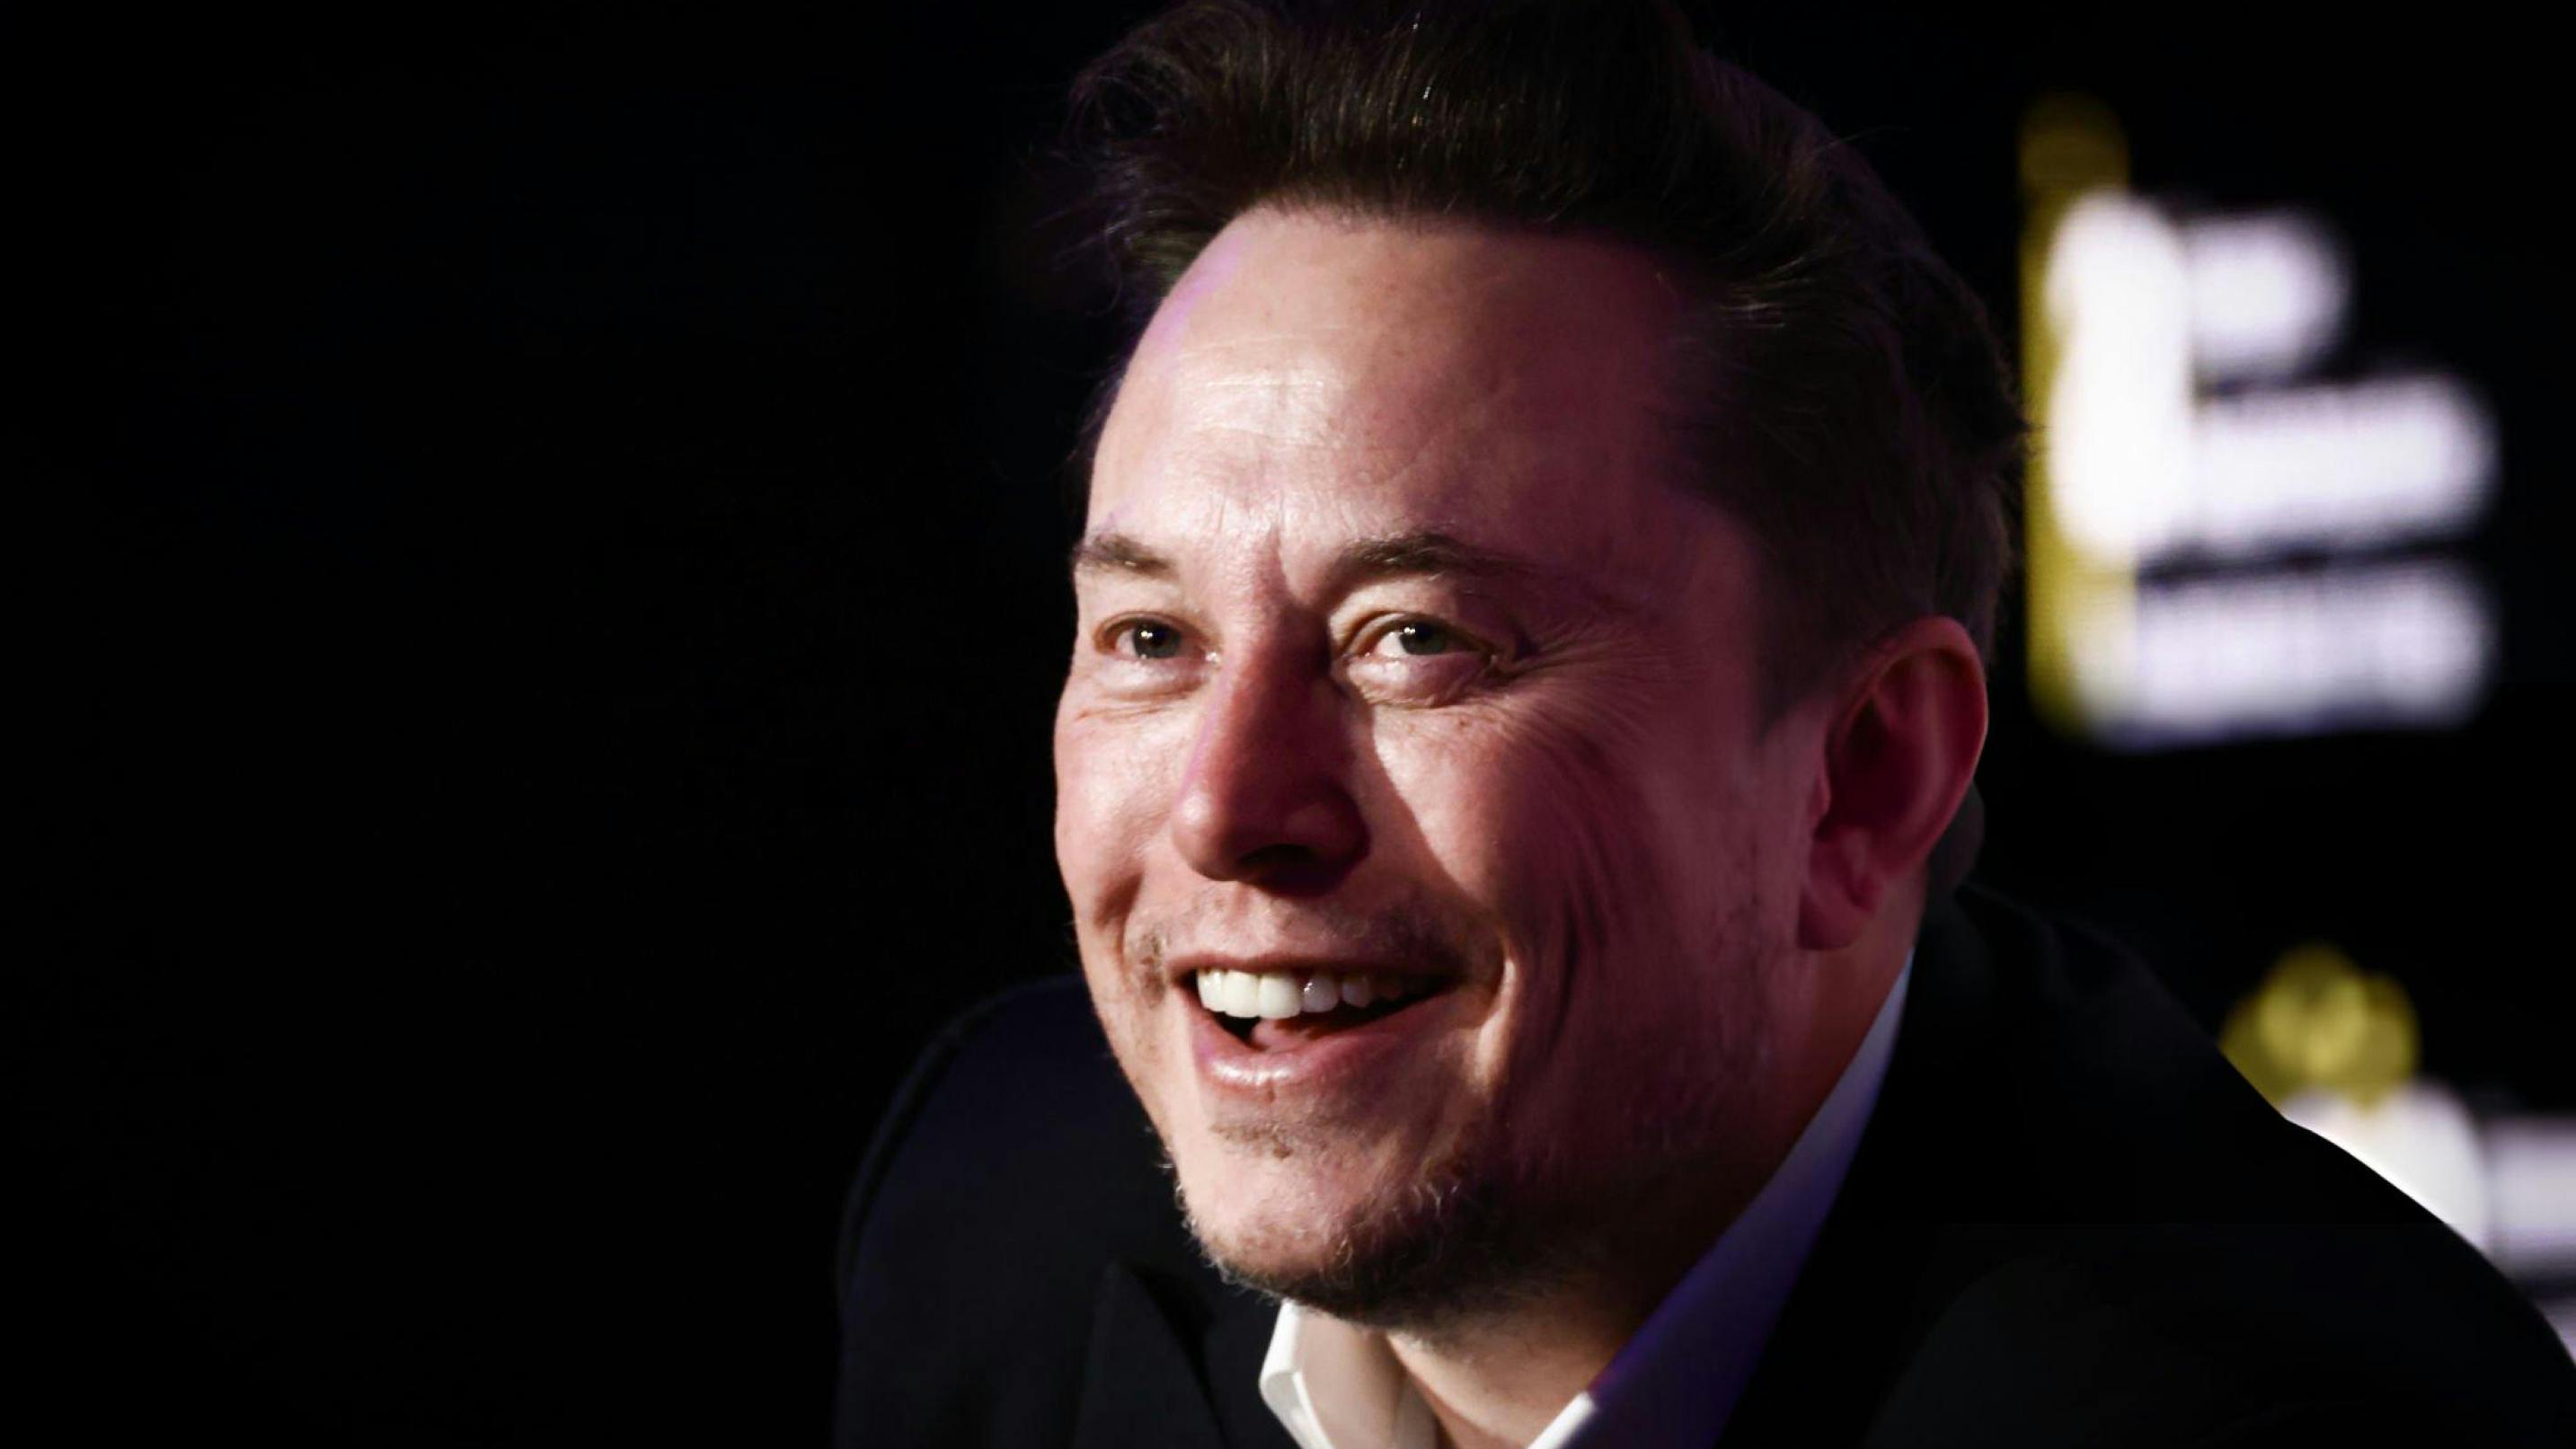 Picture of Elon Musk standing slightly sideways while smiling.